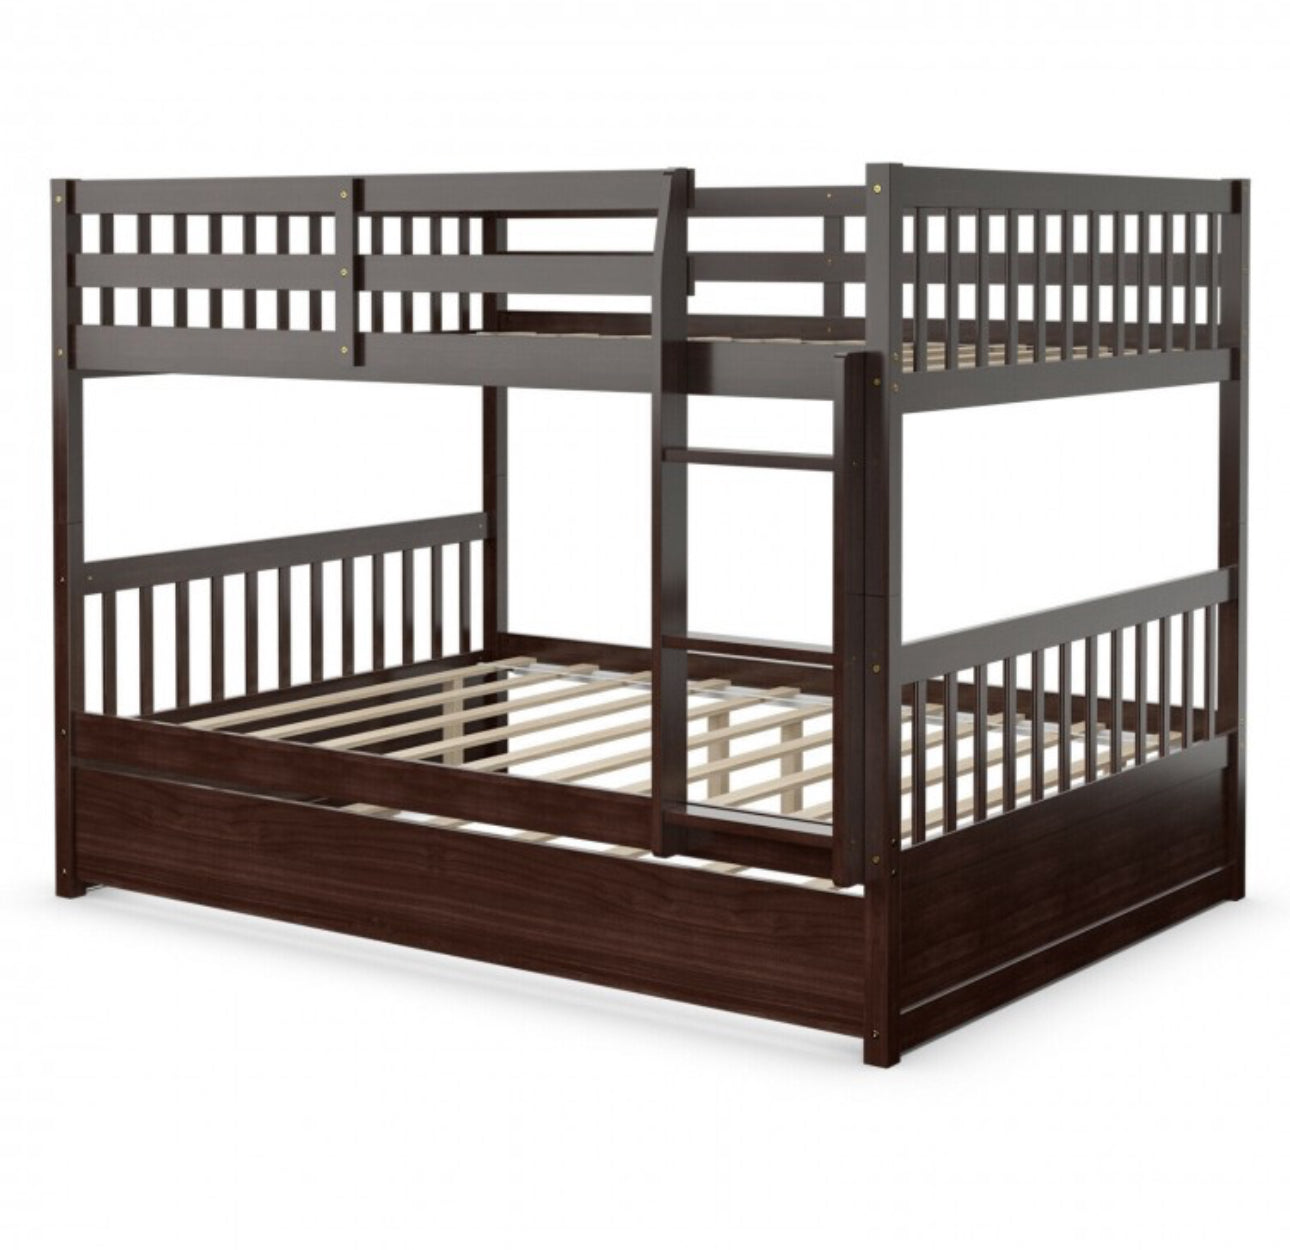 Heavy Duty Full Over Bunk Bed  Platform Bed With Solid Ladder | Sturdy Pine Wood Frame | 2 Full Bunk Beds In 1